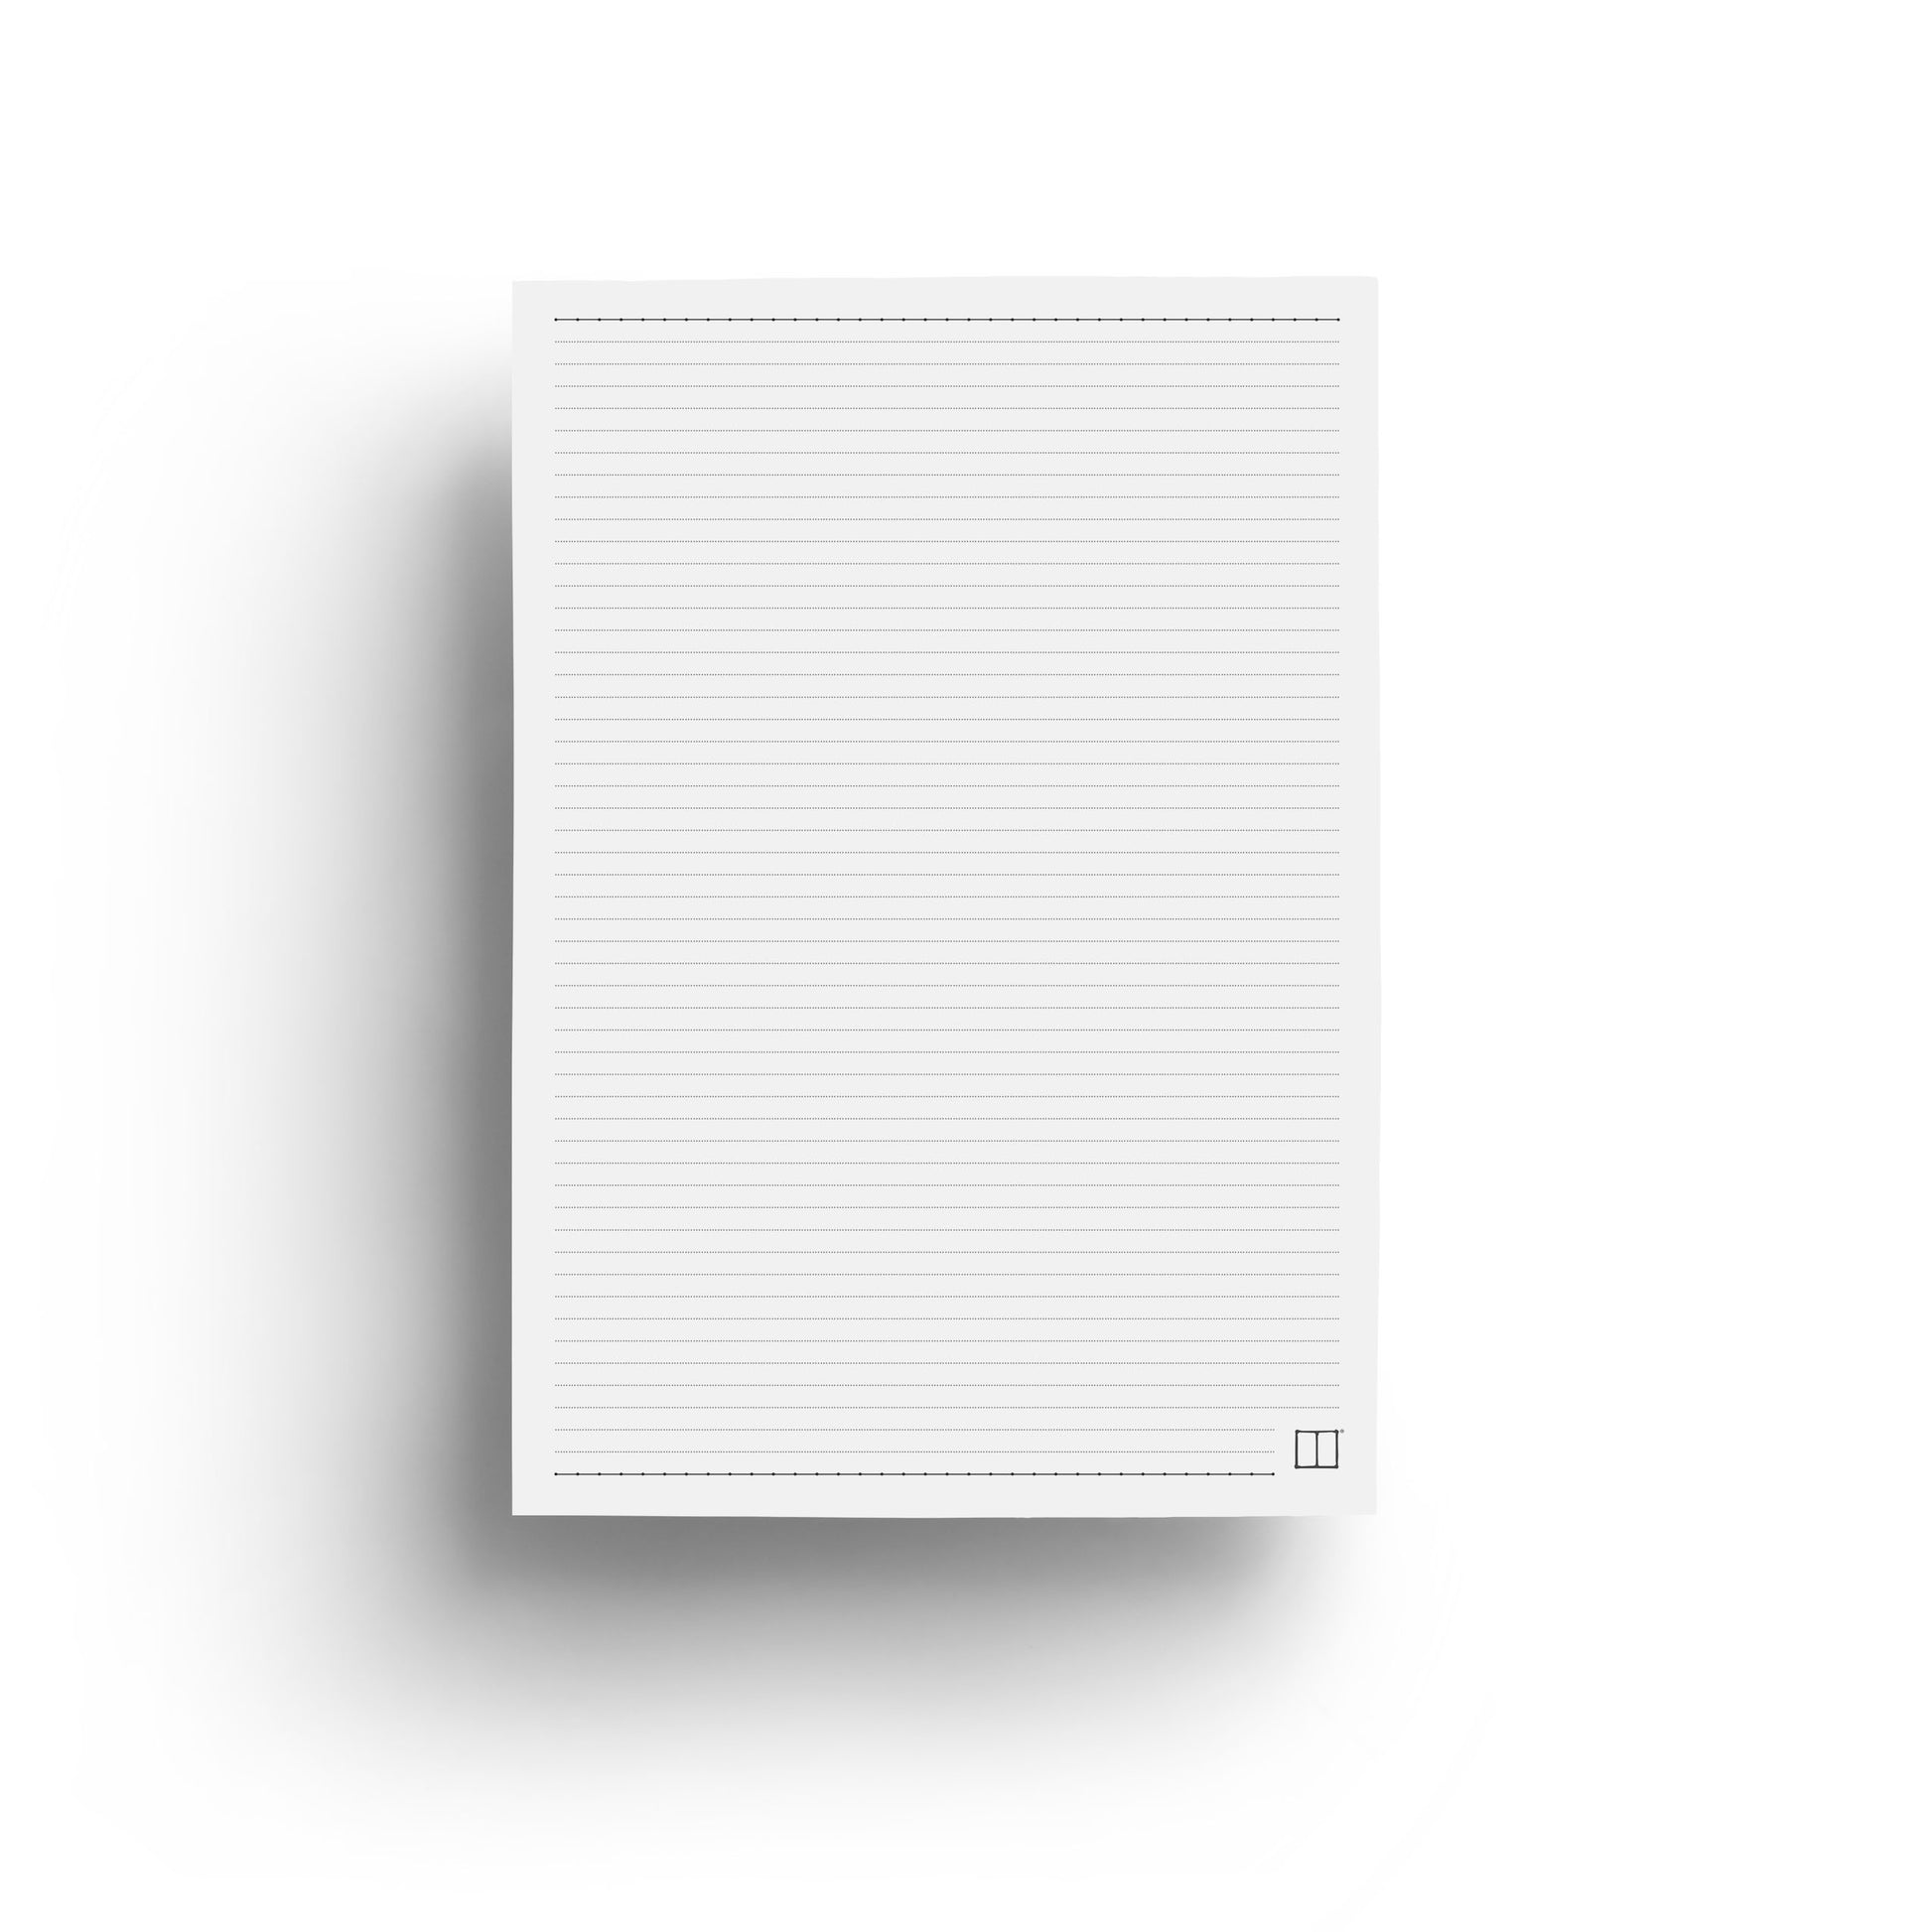 Paper Pack - 28 X 20 cm - 100 Sheets - (120 gm Lined White Paper) - from SketchBook Stationery